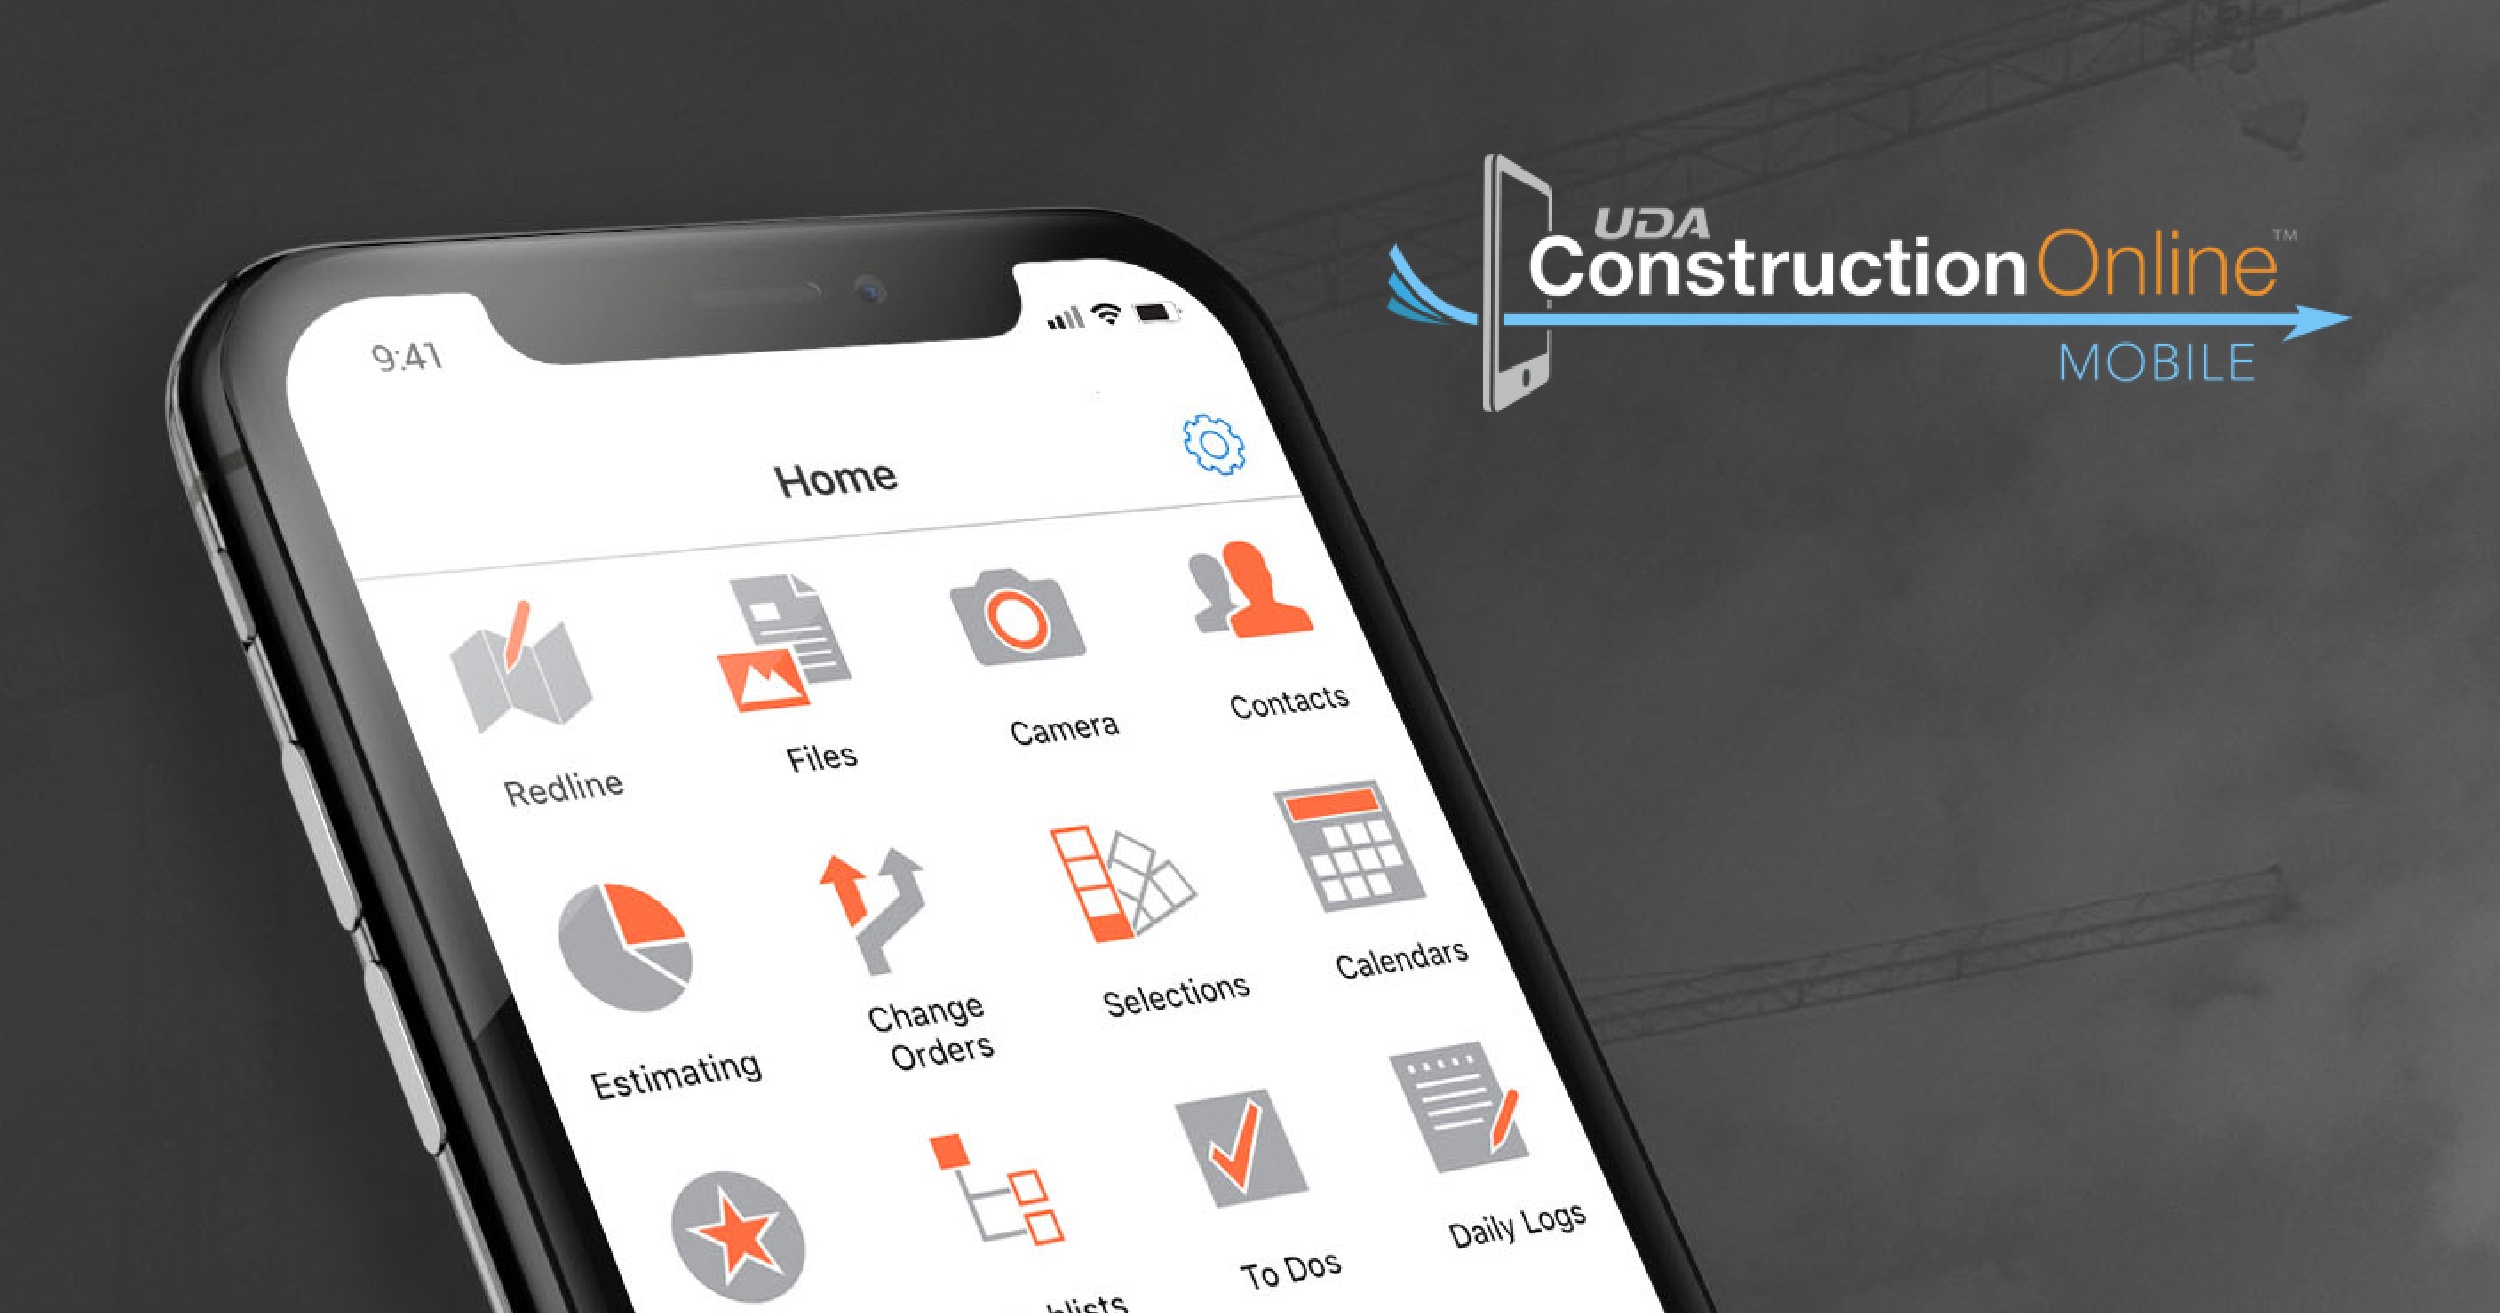 ConstructionOnline Mobile + iPhone X: The Next Generation of Project Management